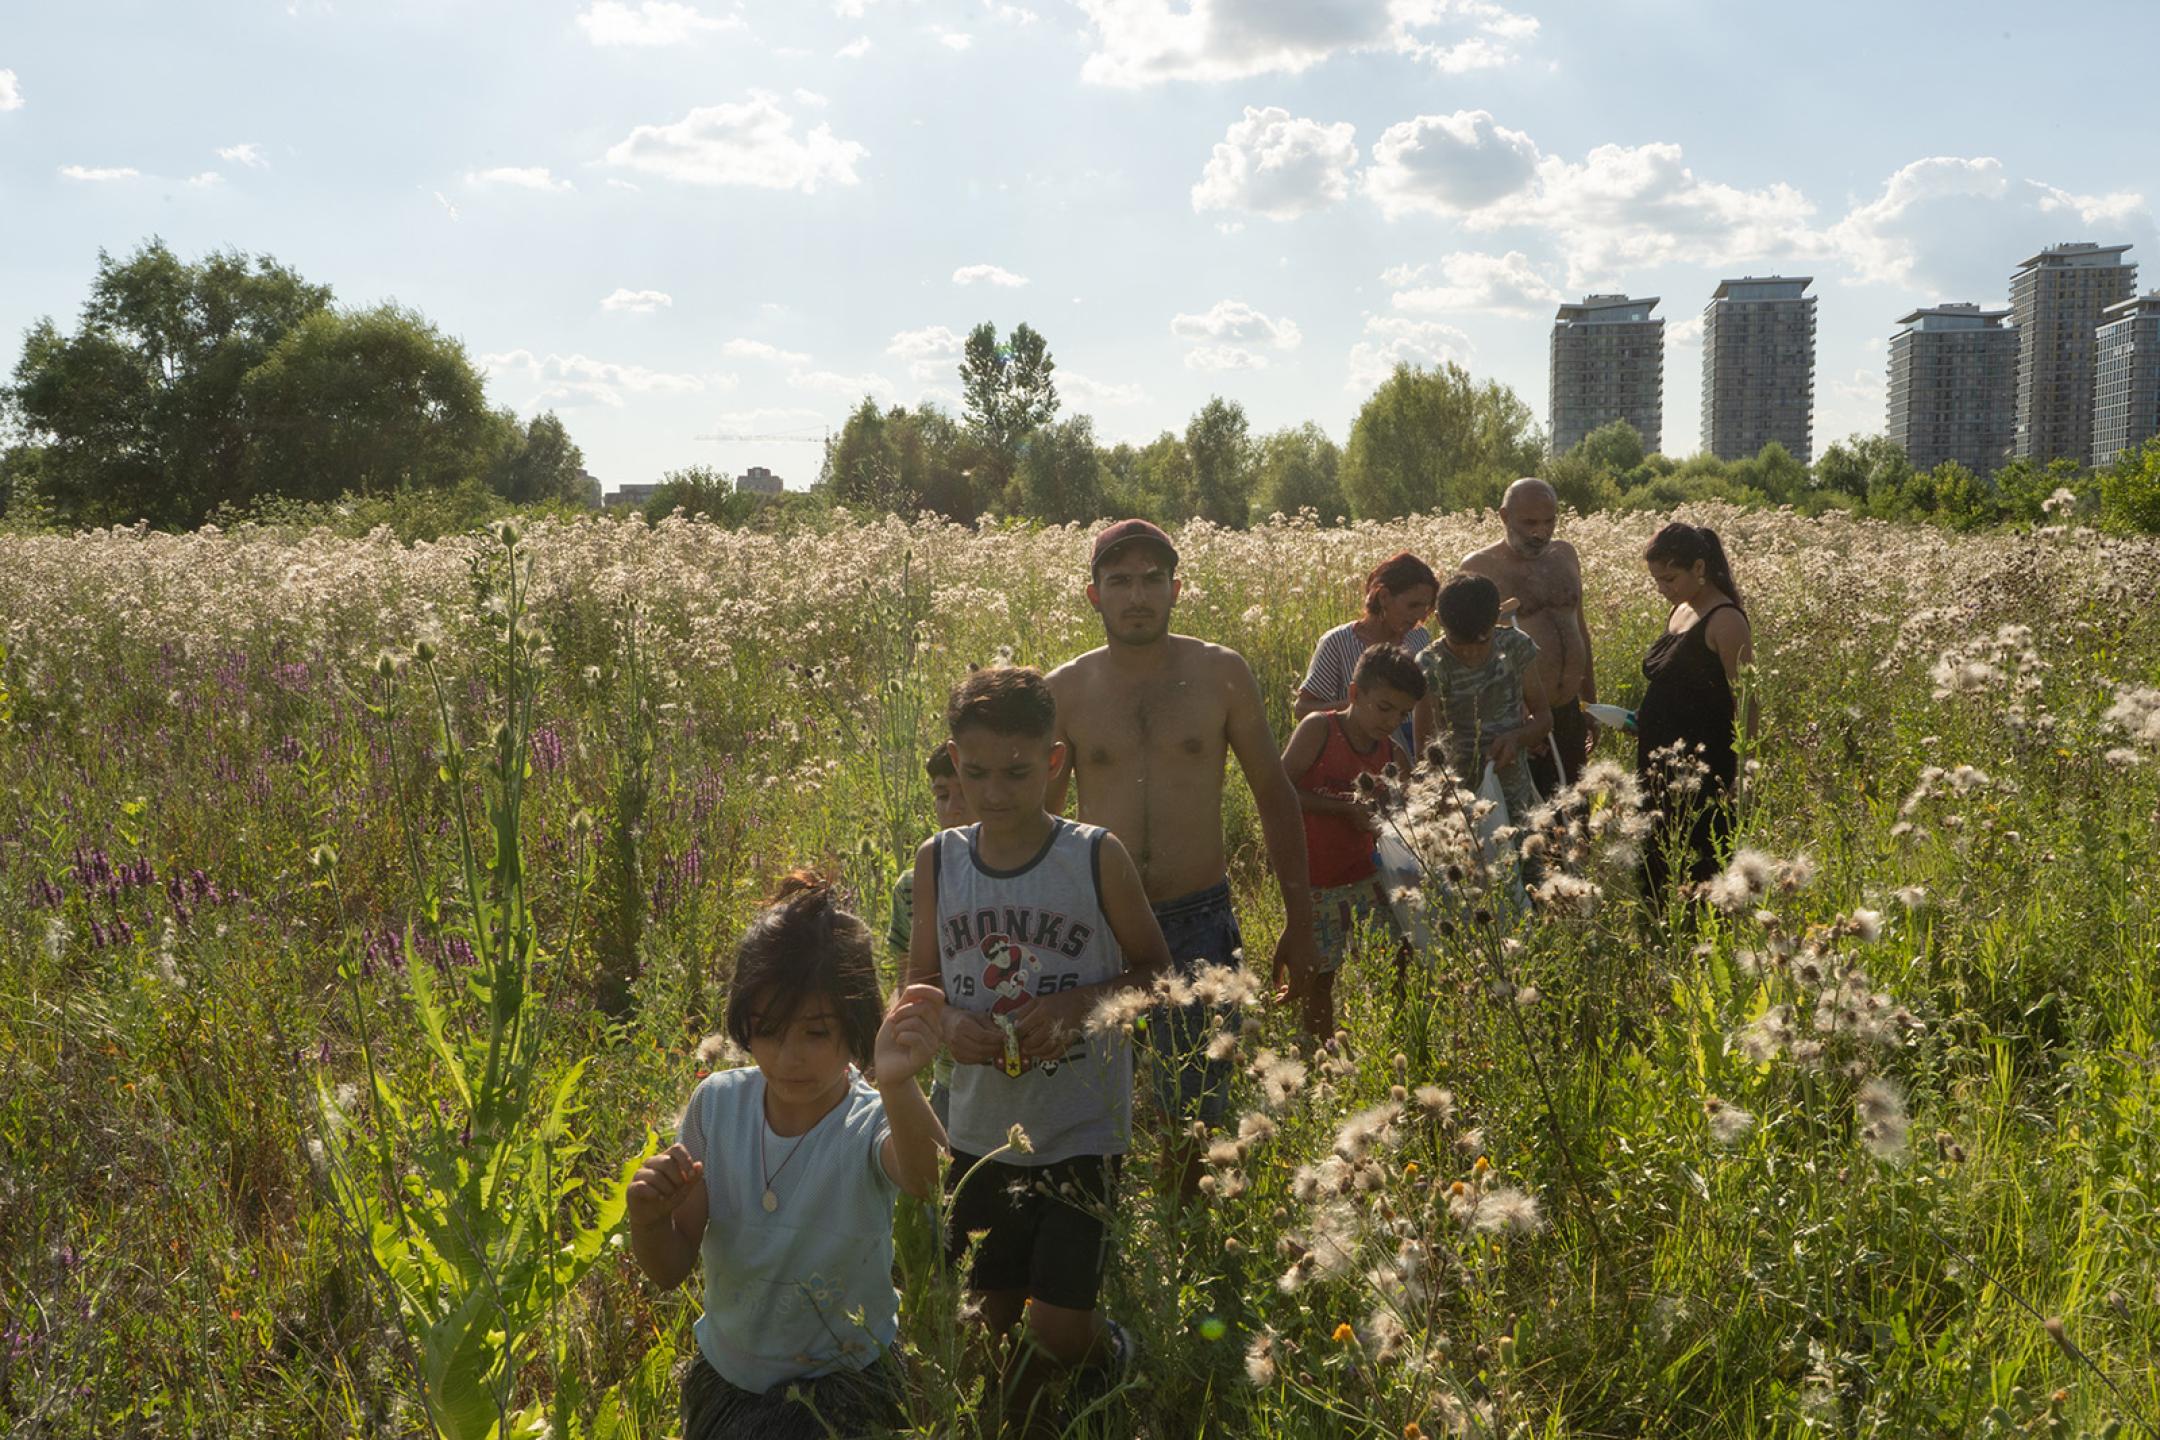 A family with seven children of different age is strolling through a big meadow during summertime. In the background you can see huge apartment houses.